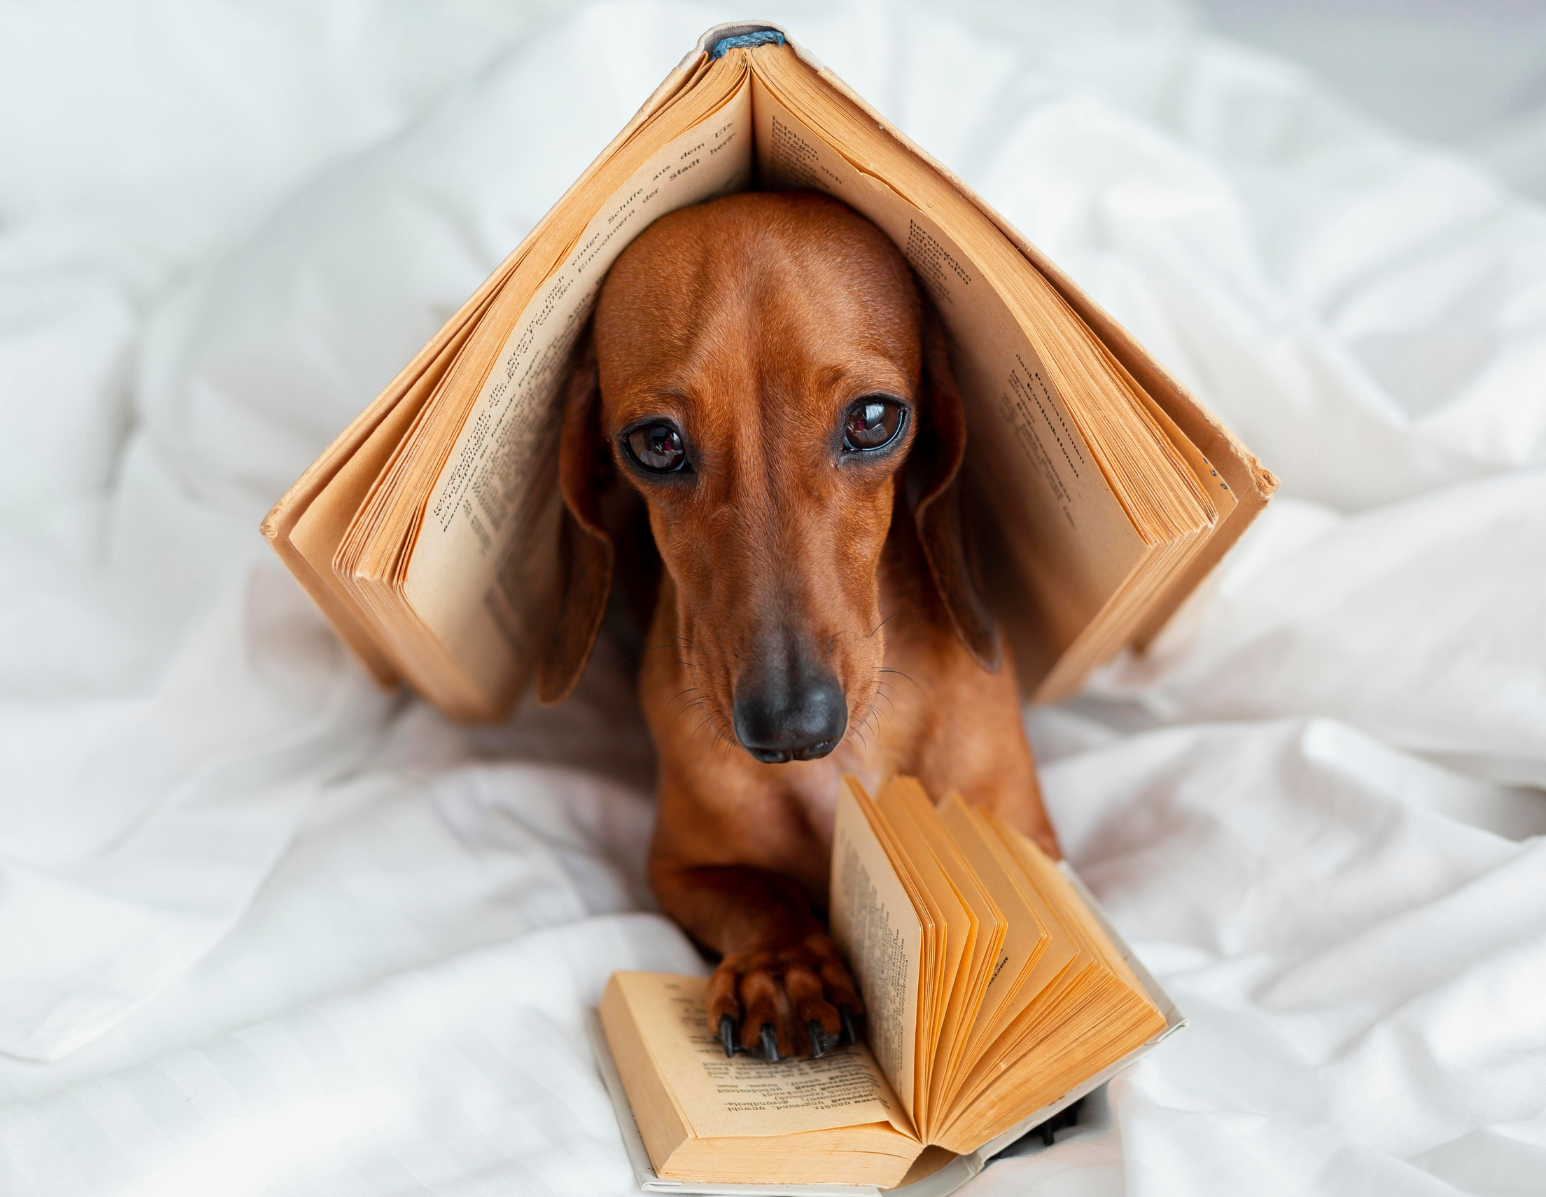 Dog with book on head.